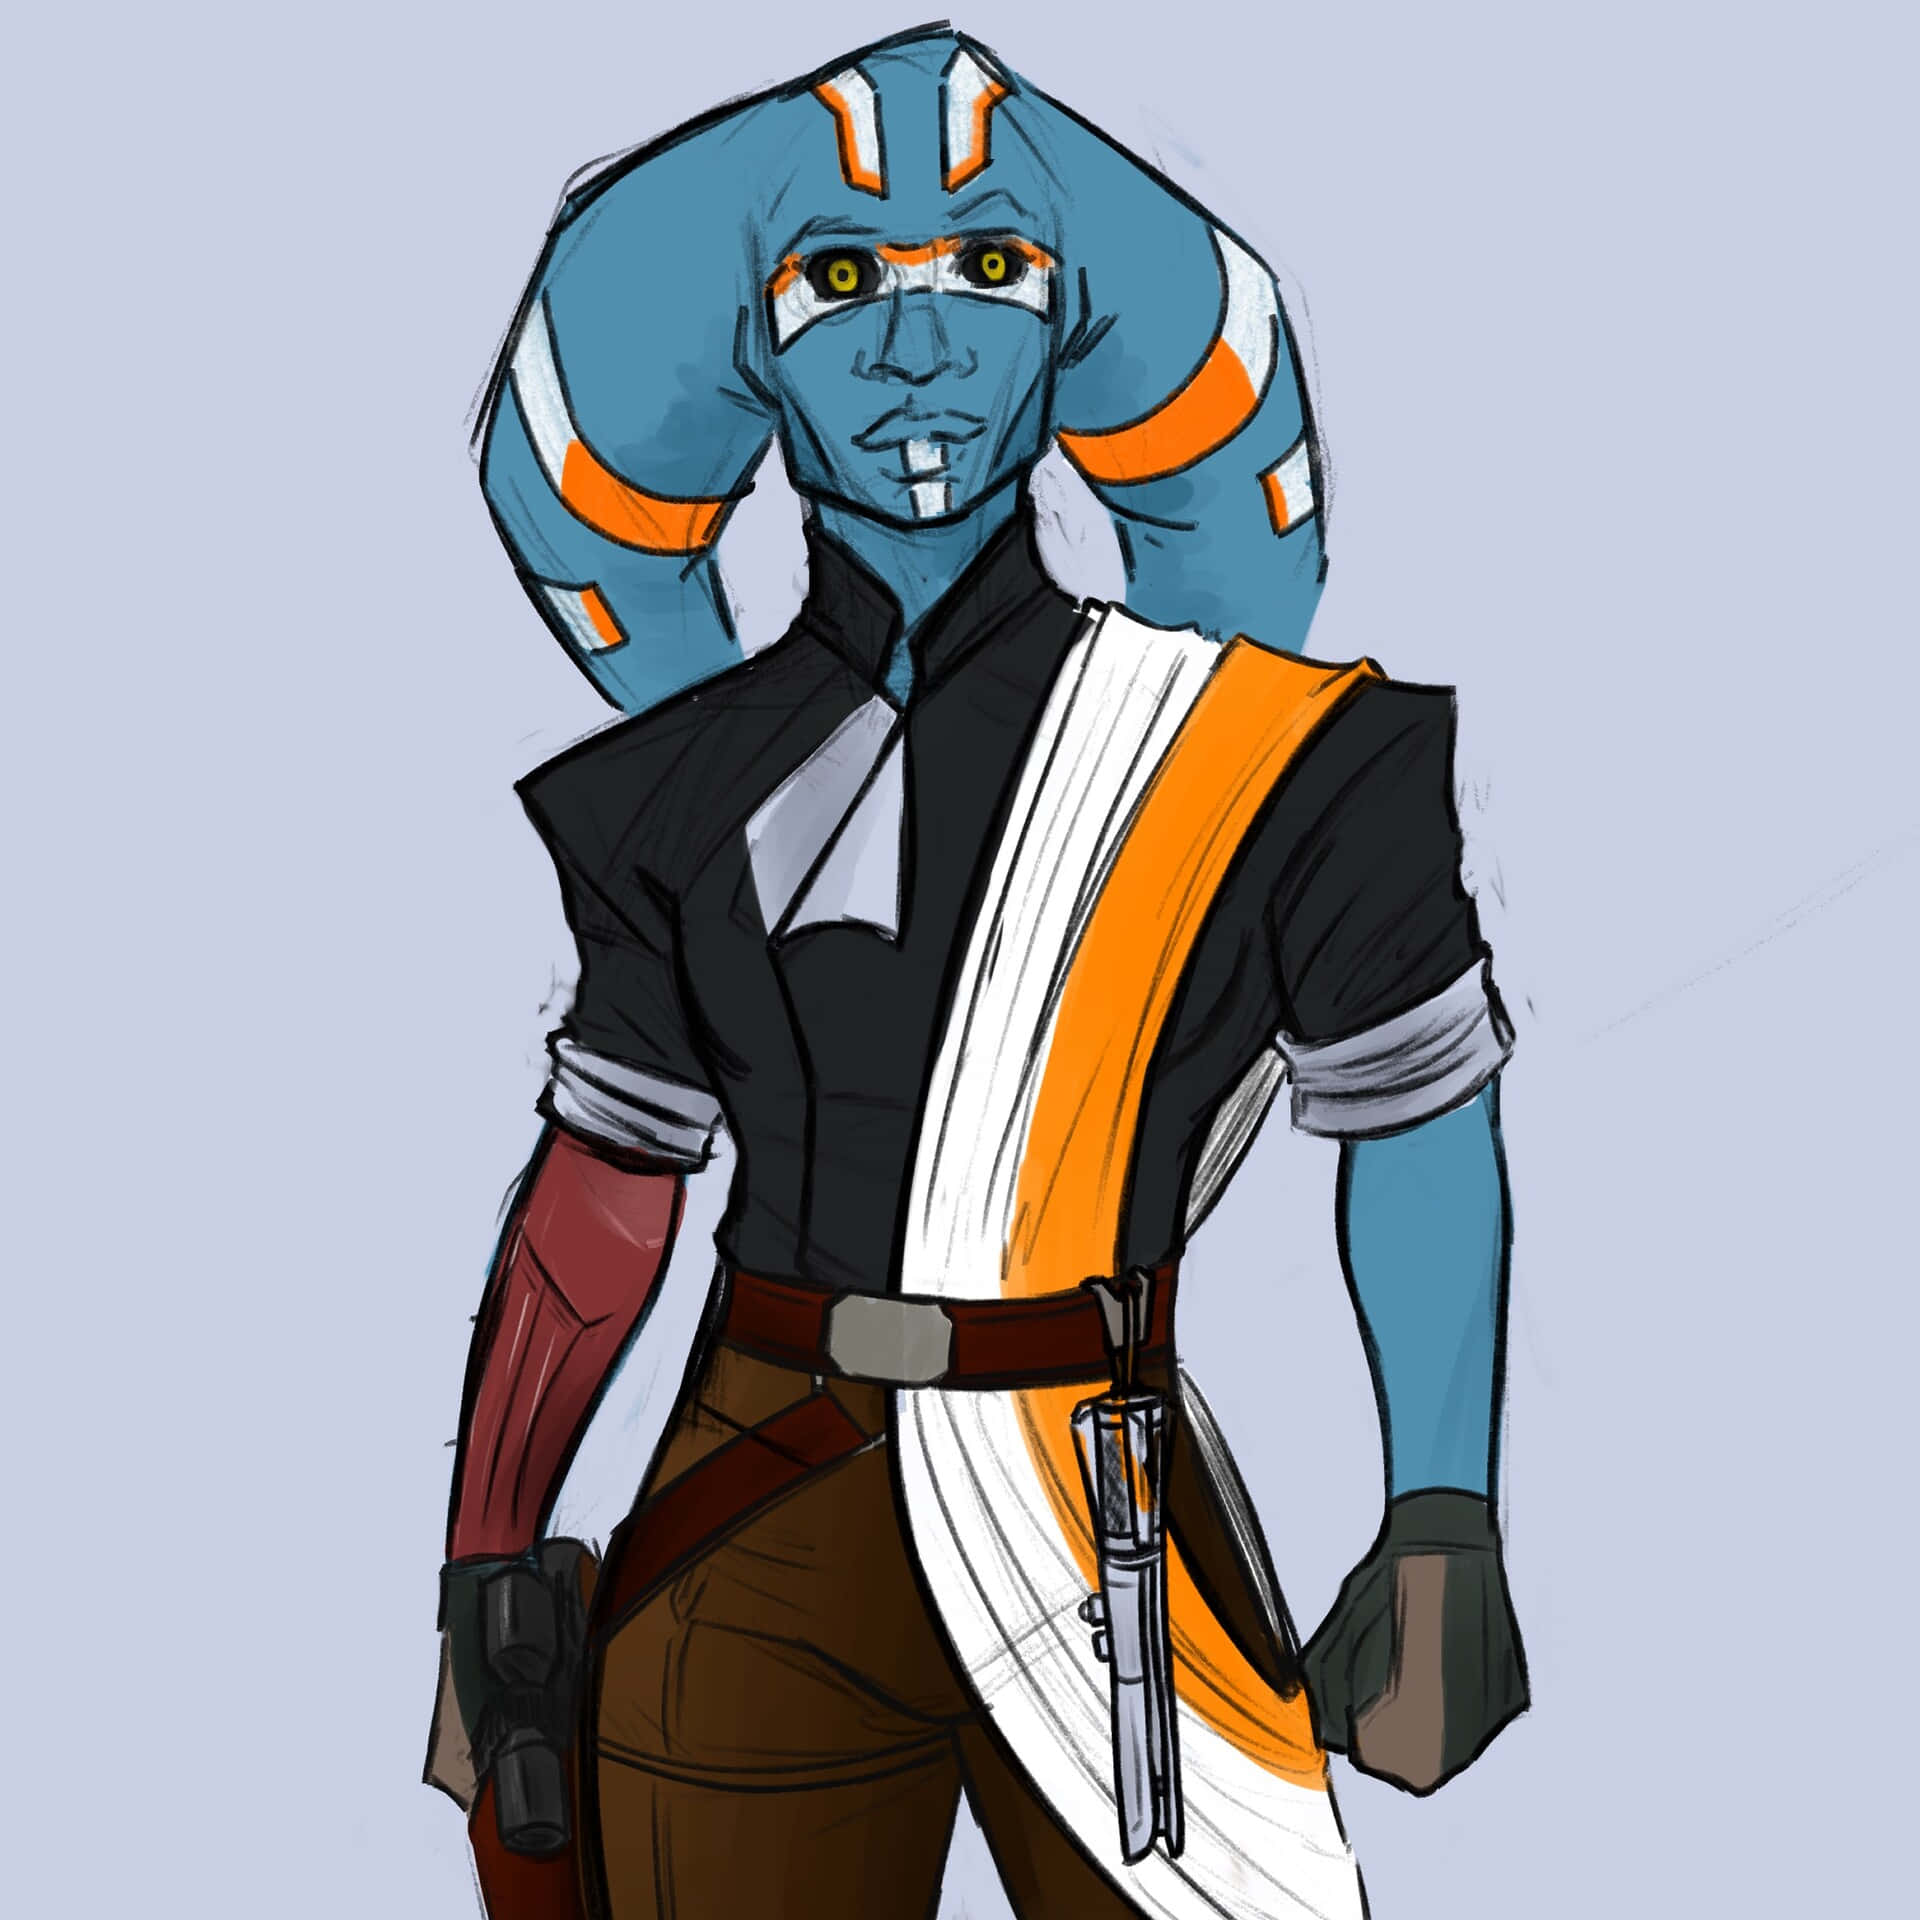 A vibrant Twi'Lek from the Star Wars universe Wallpaper